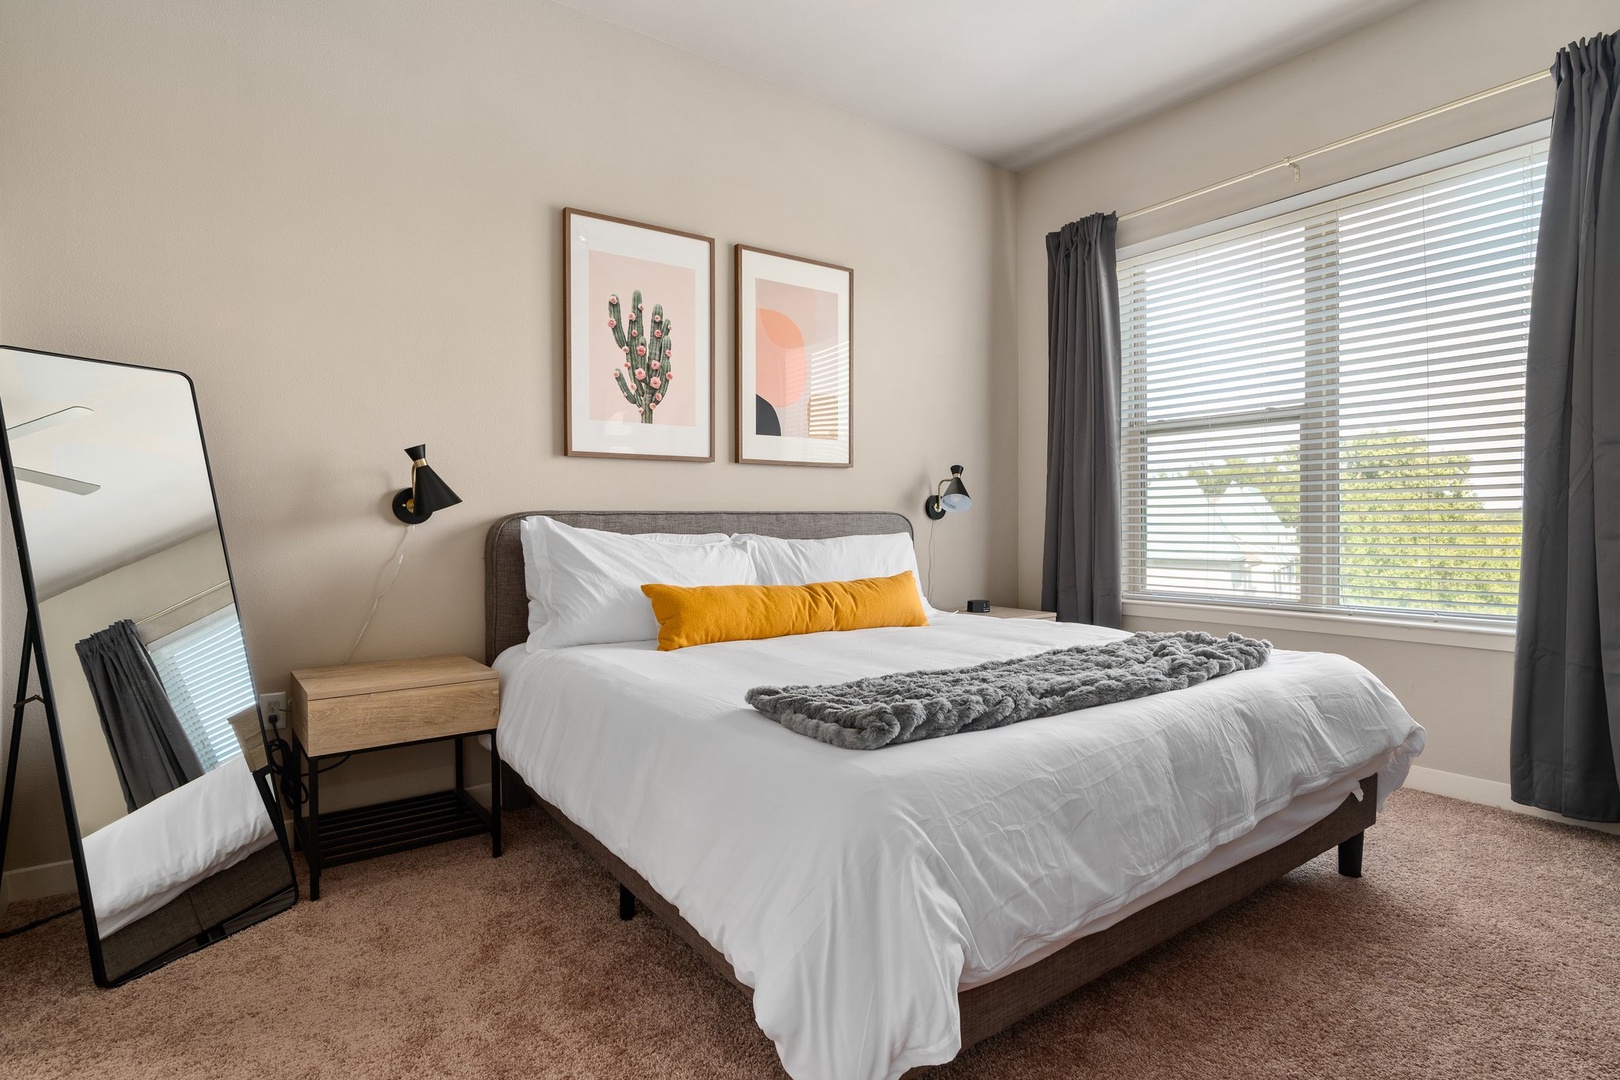 Sink into comfort on a memory foam bed in this inviting bedroom.